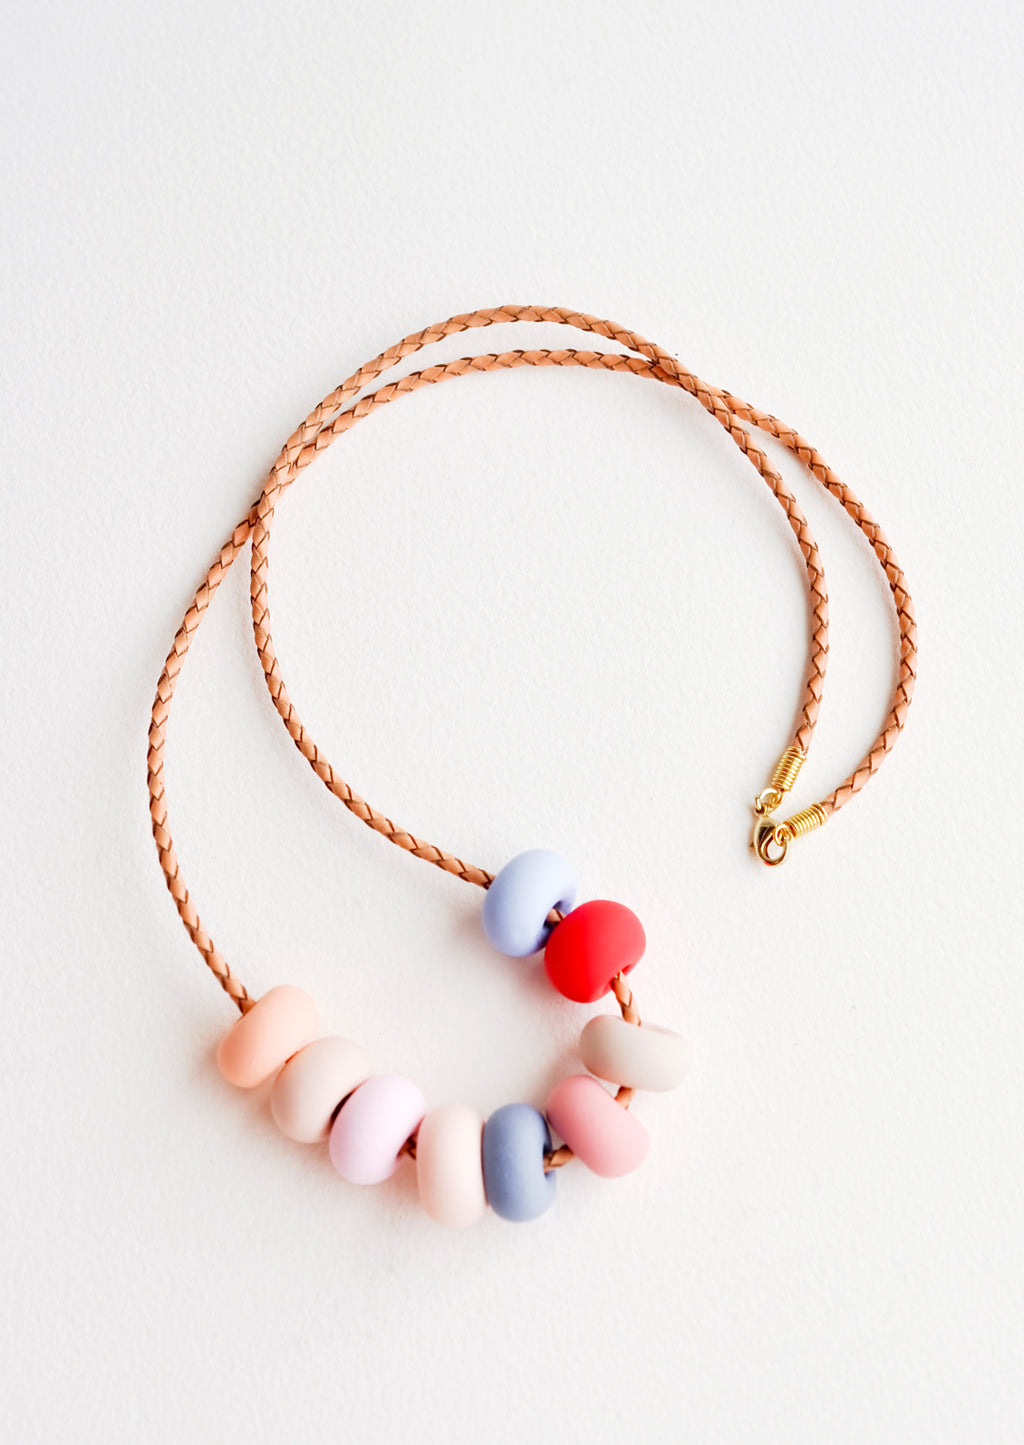 Desert Rose: Woven leather cord necklace with gold clasp and rounded clay beads tans, pinks, red, and blues.